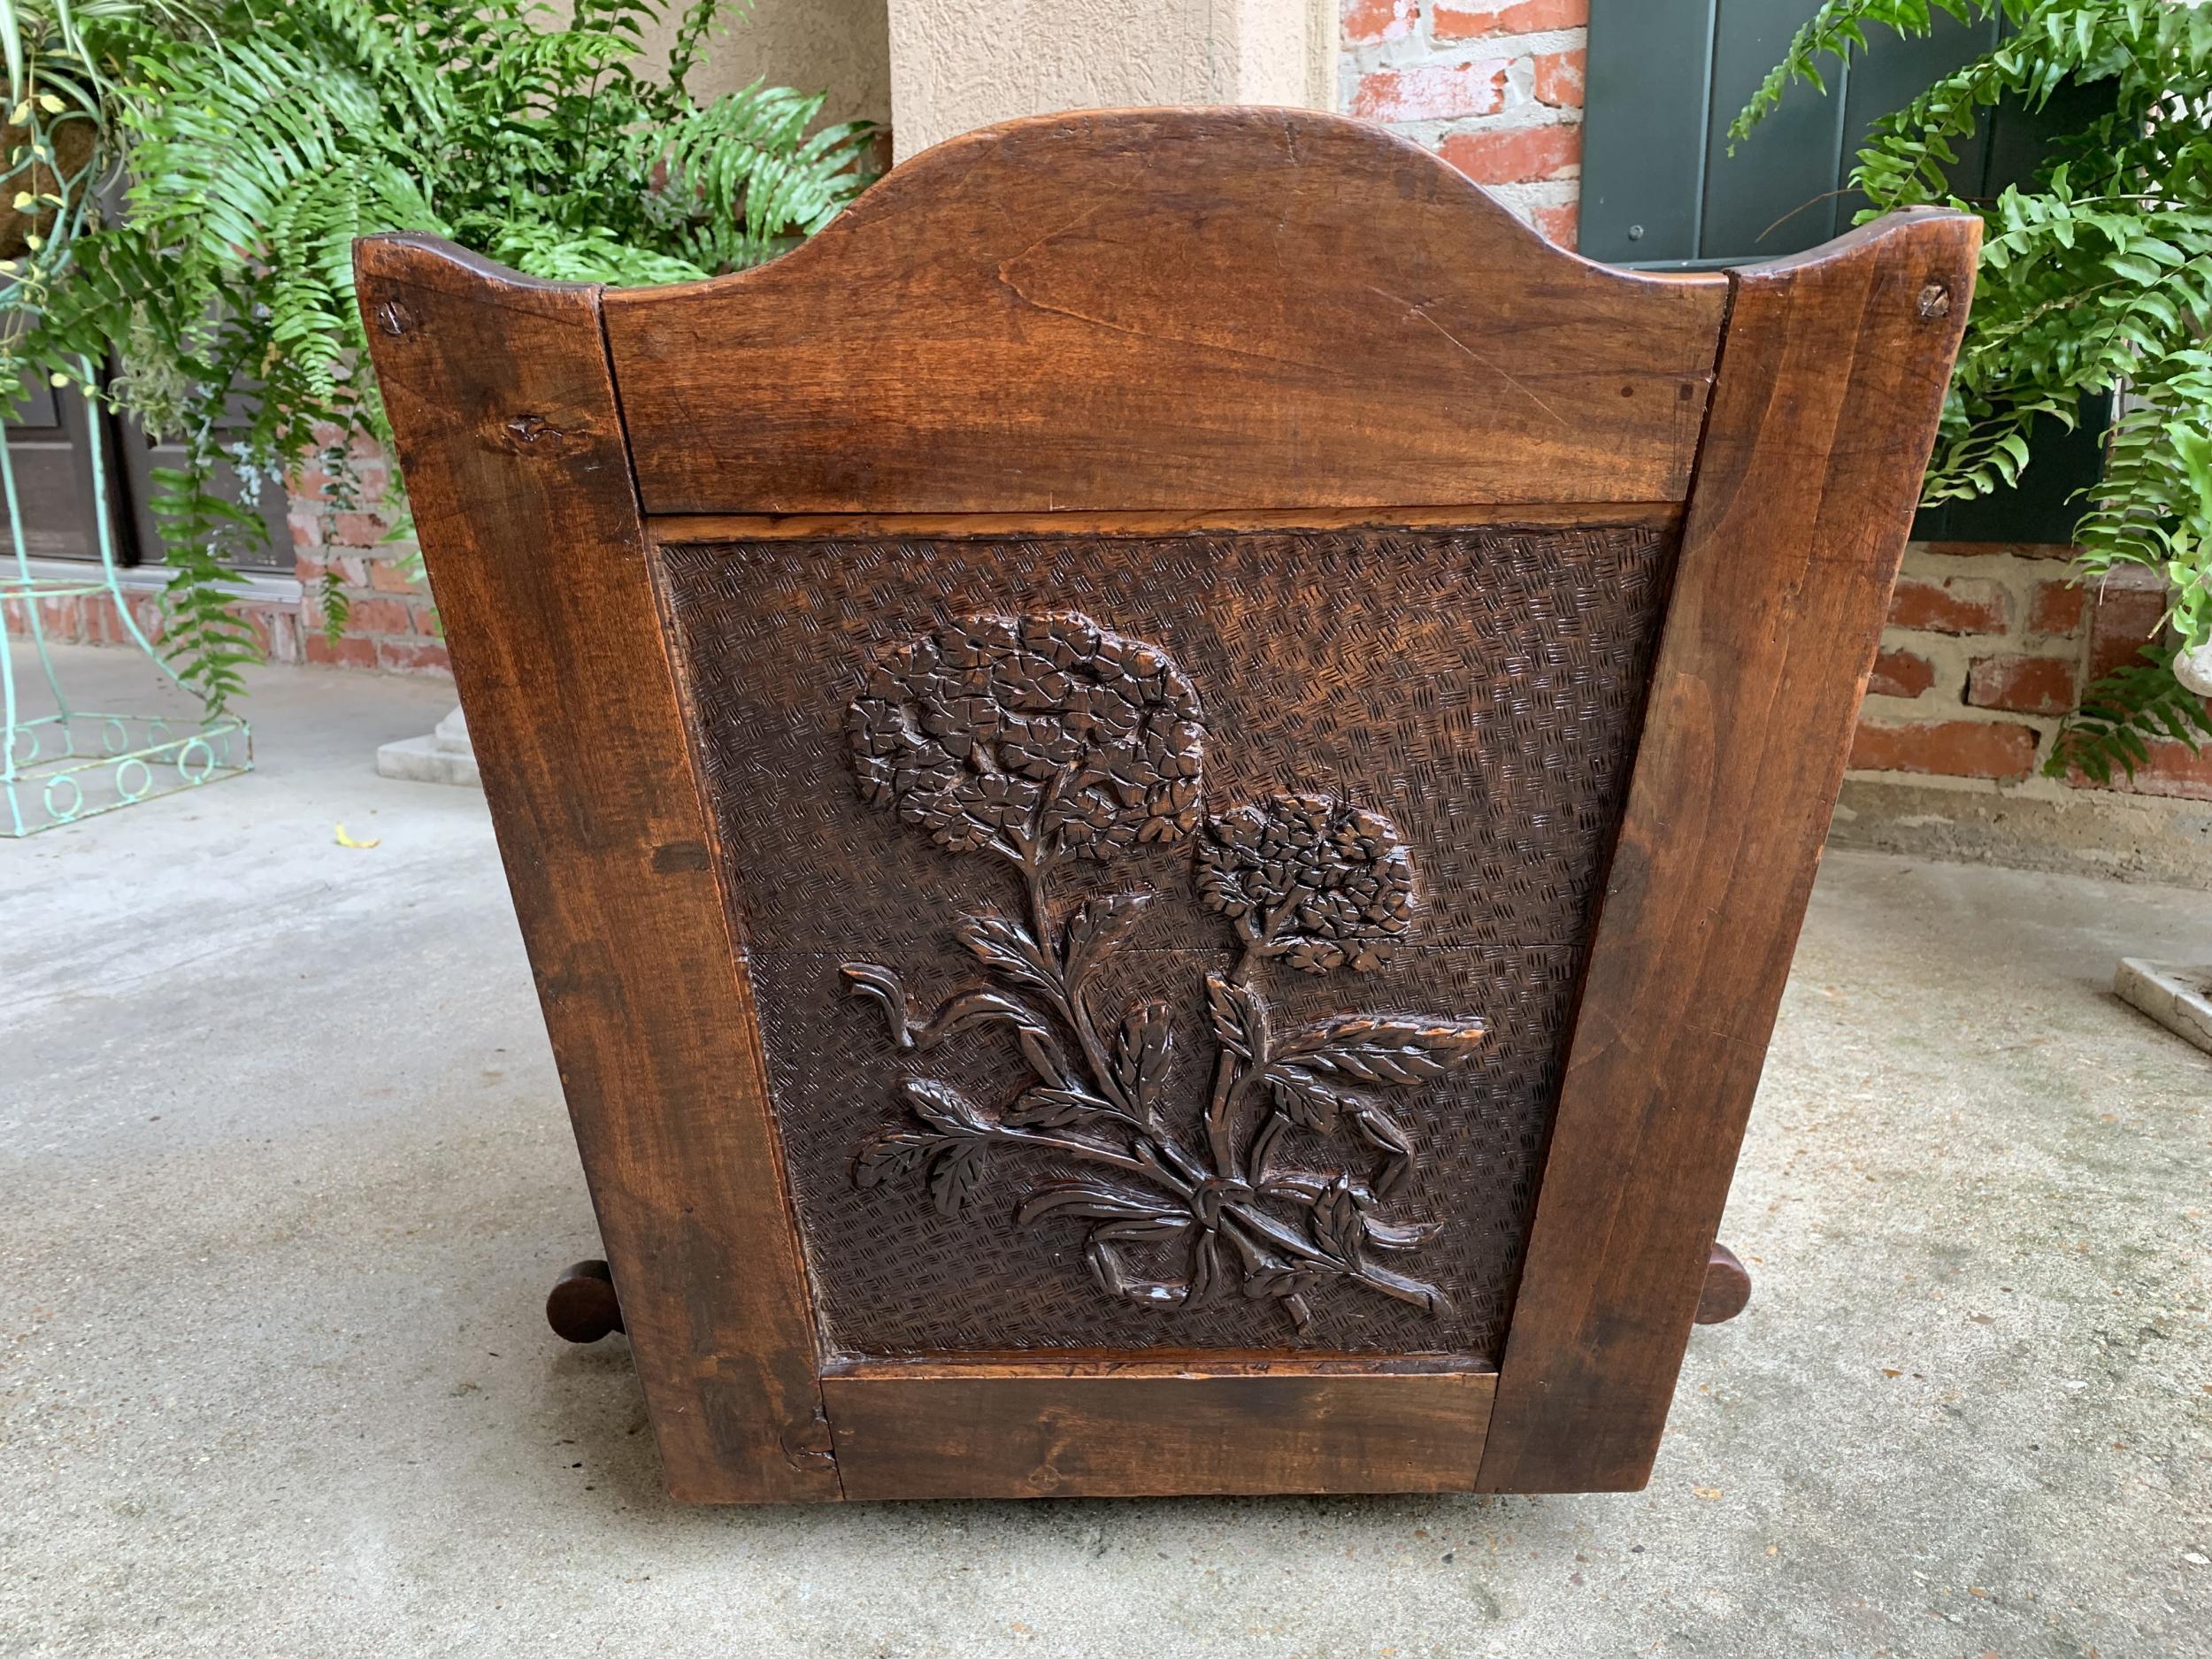 Metal Antique French Provincial Cradle Carved Oak Baby Doll Bed Crib Planter c1840 For Sale